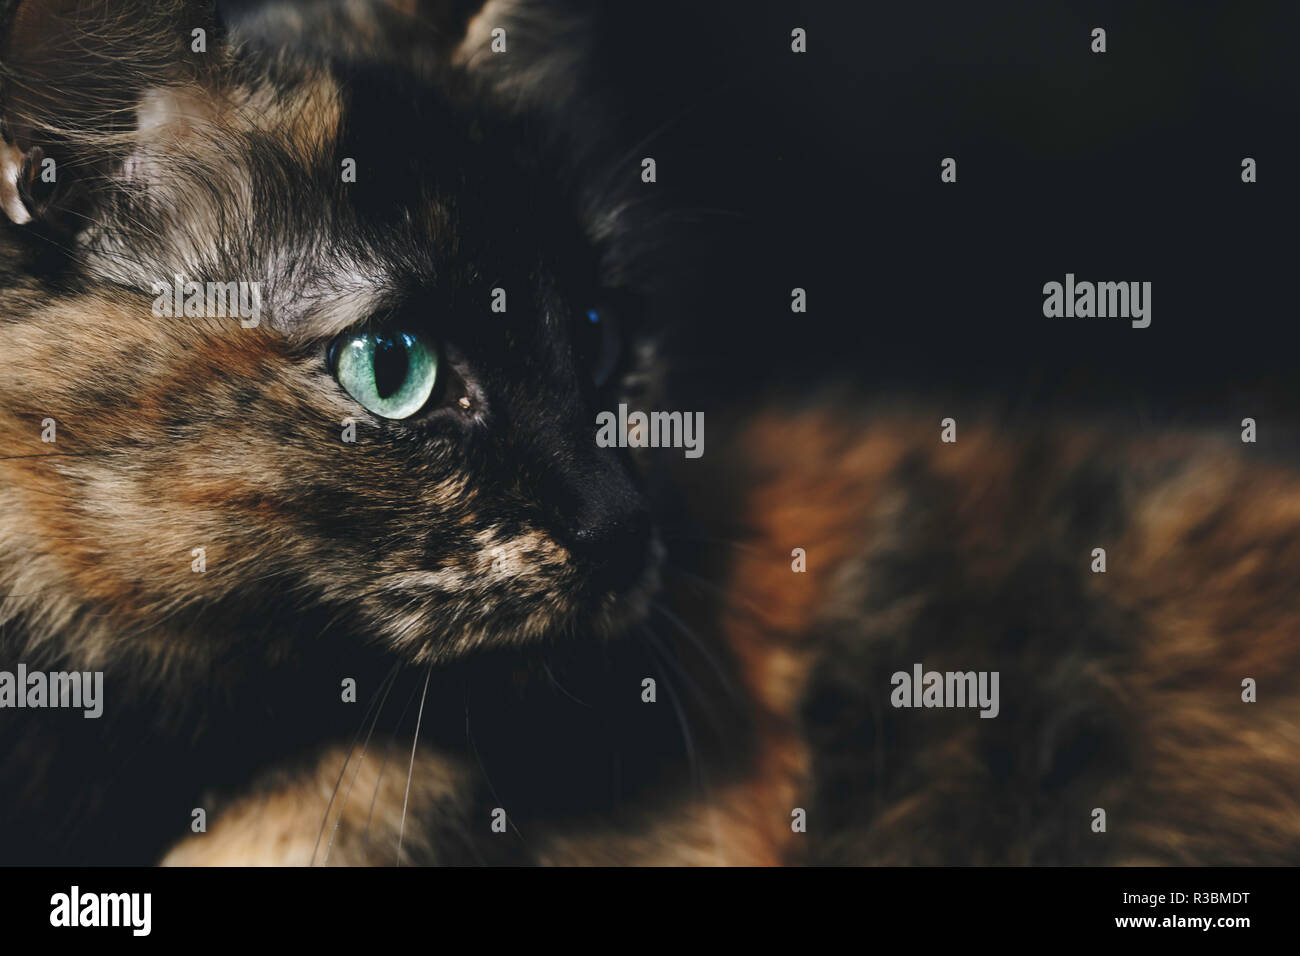 Pretty cat lying with green eyes looking to the side with black background Stock Photo